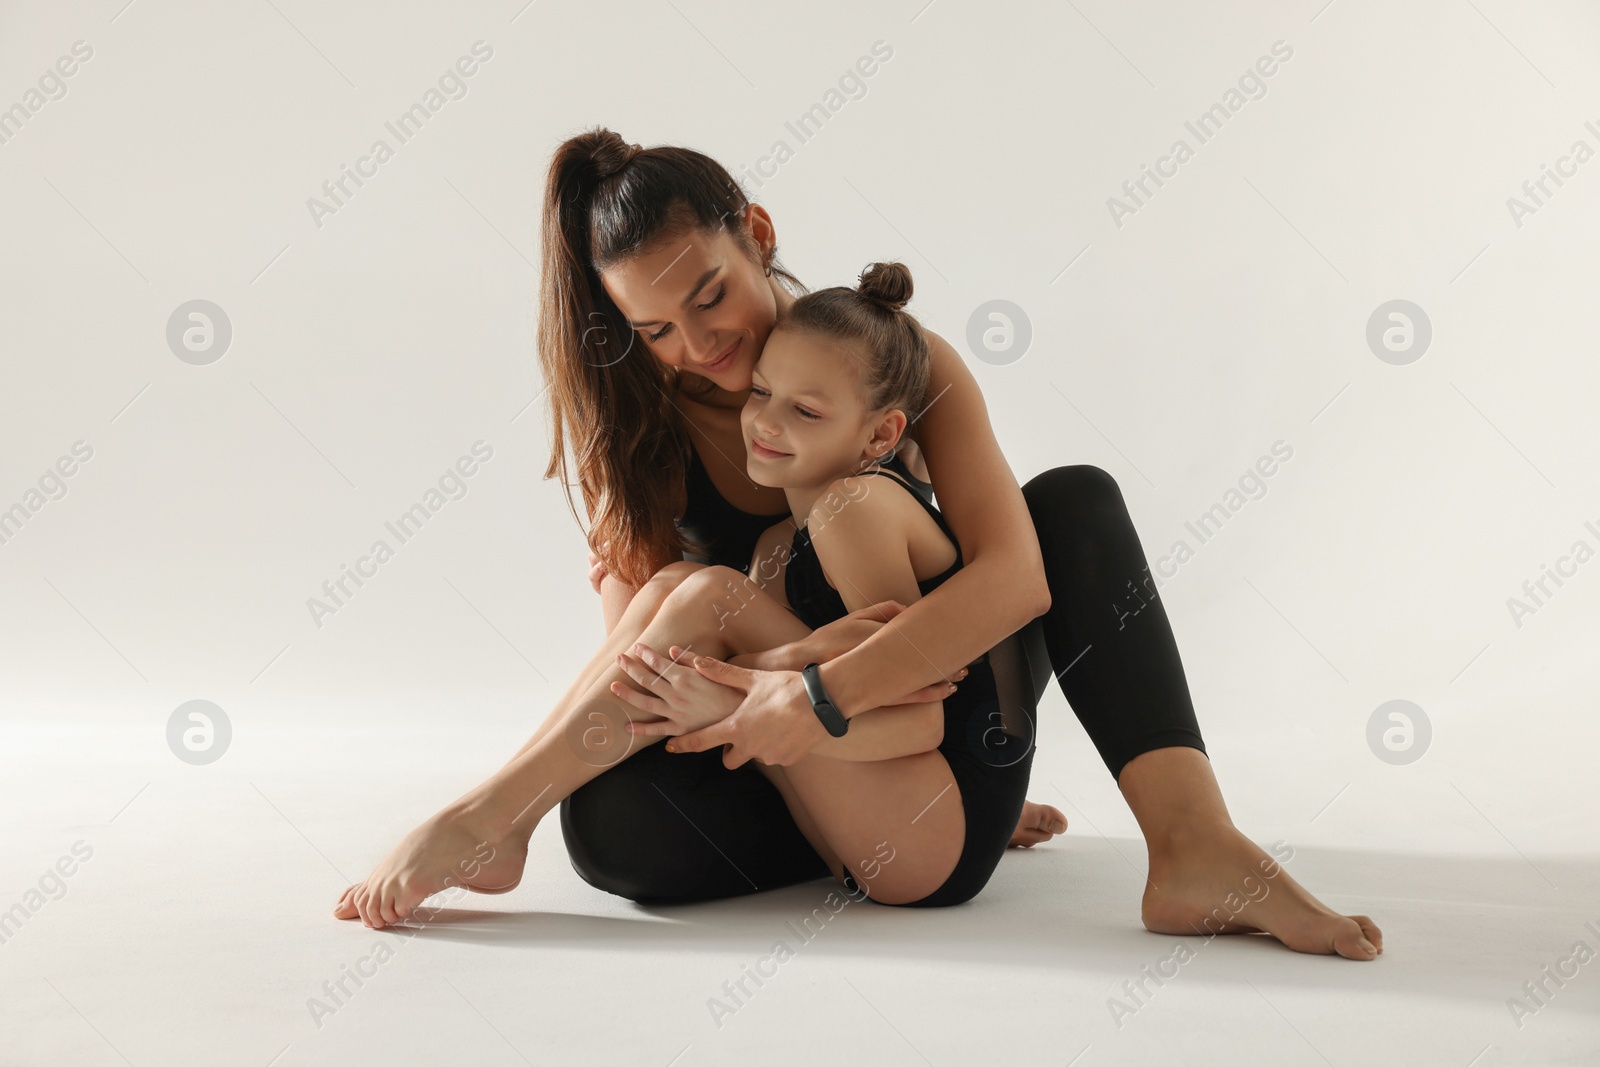 Photo of Little gymnast and her coach sitting on white background